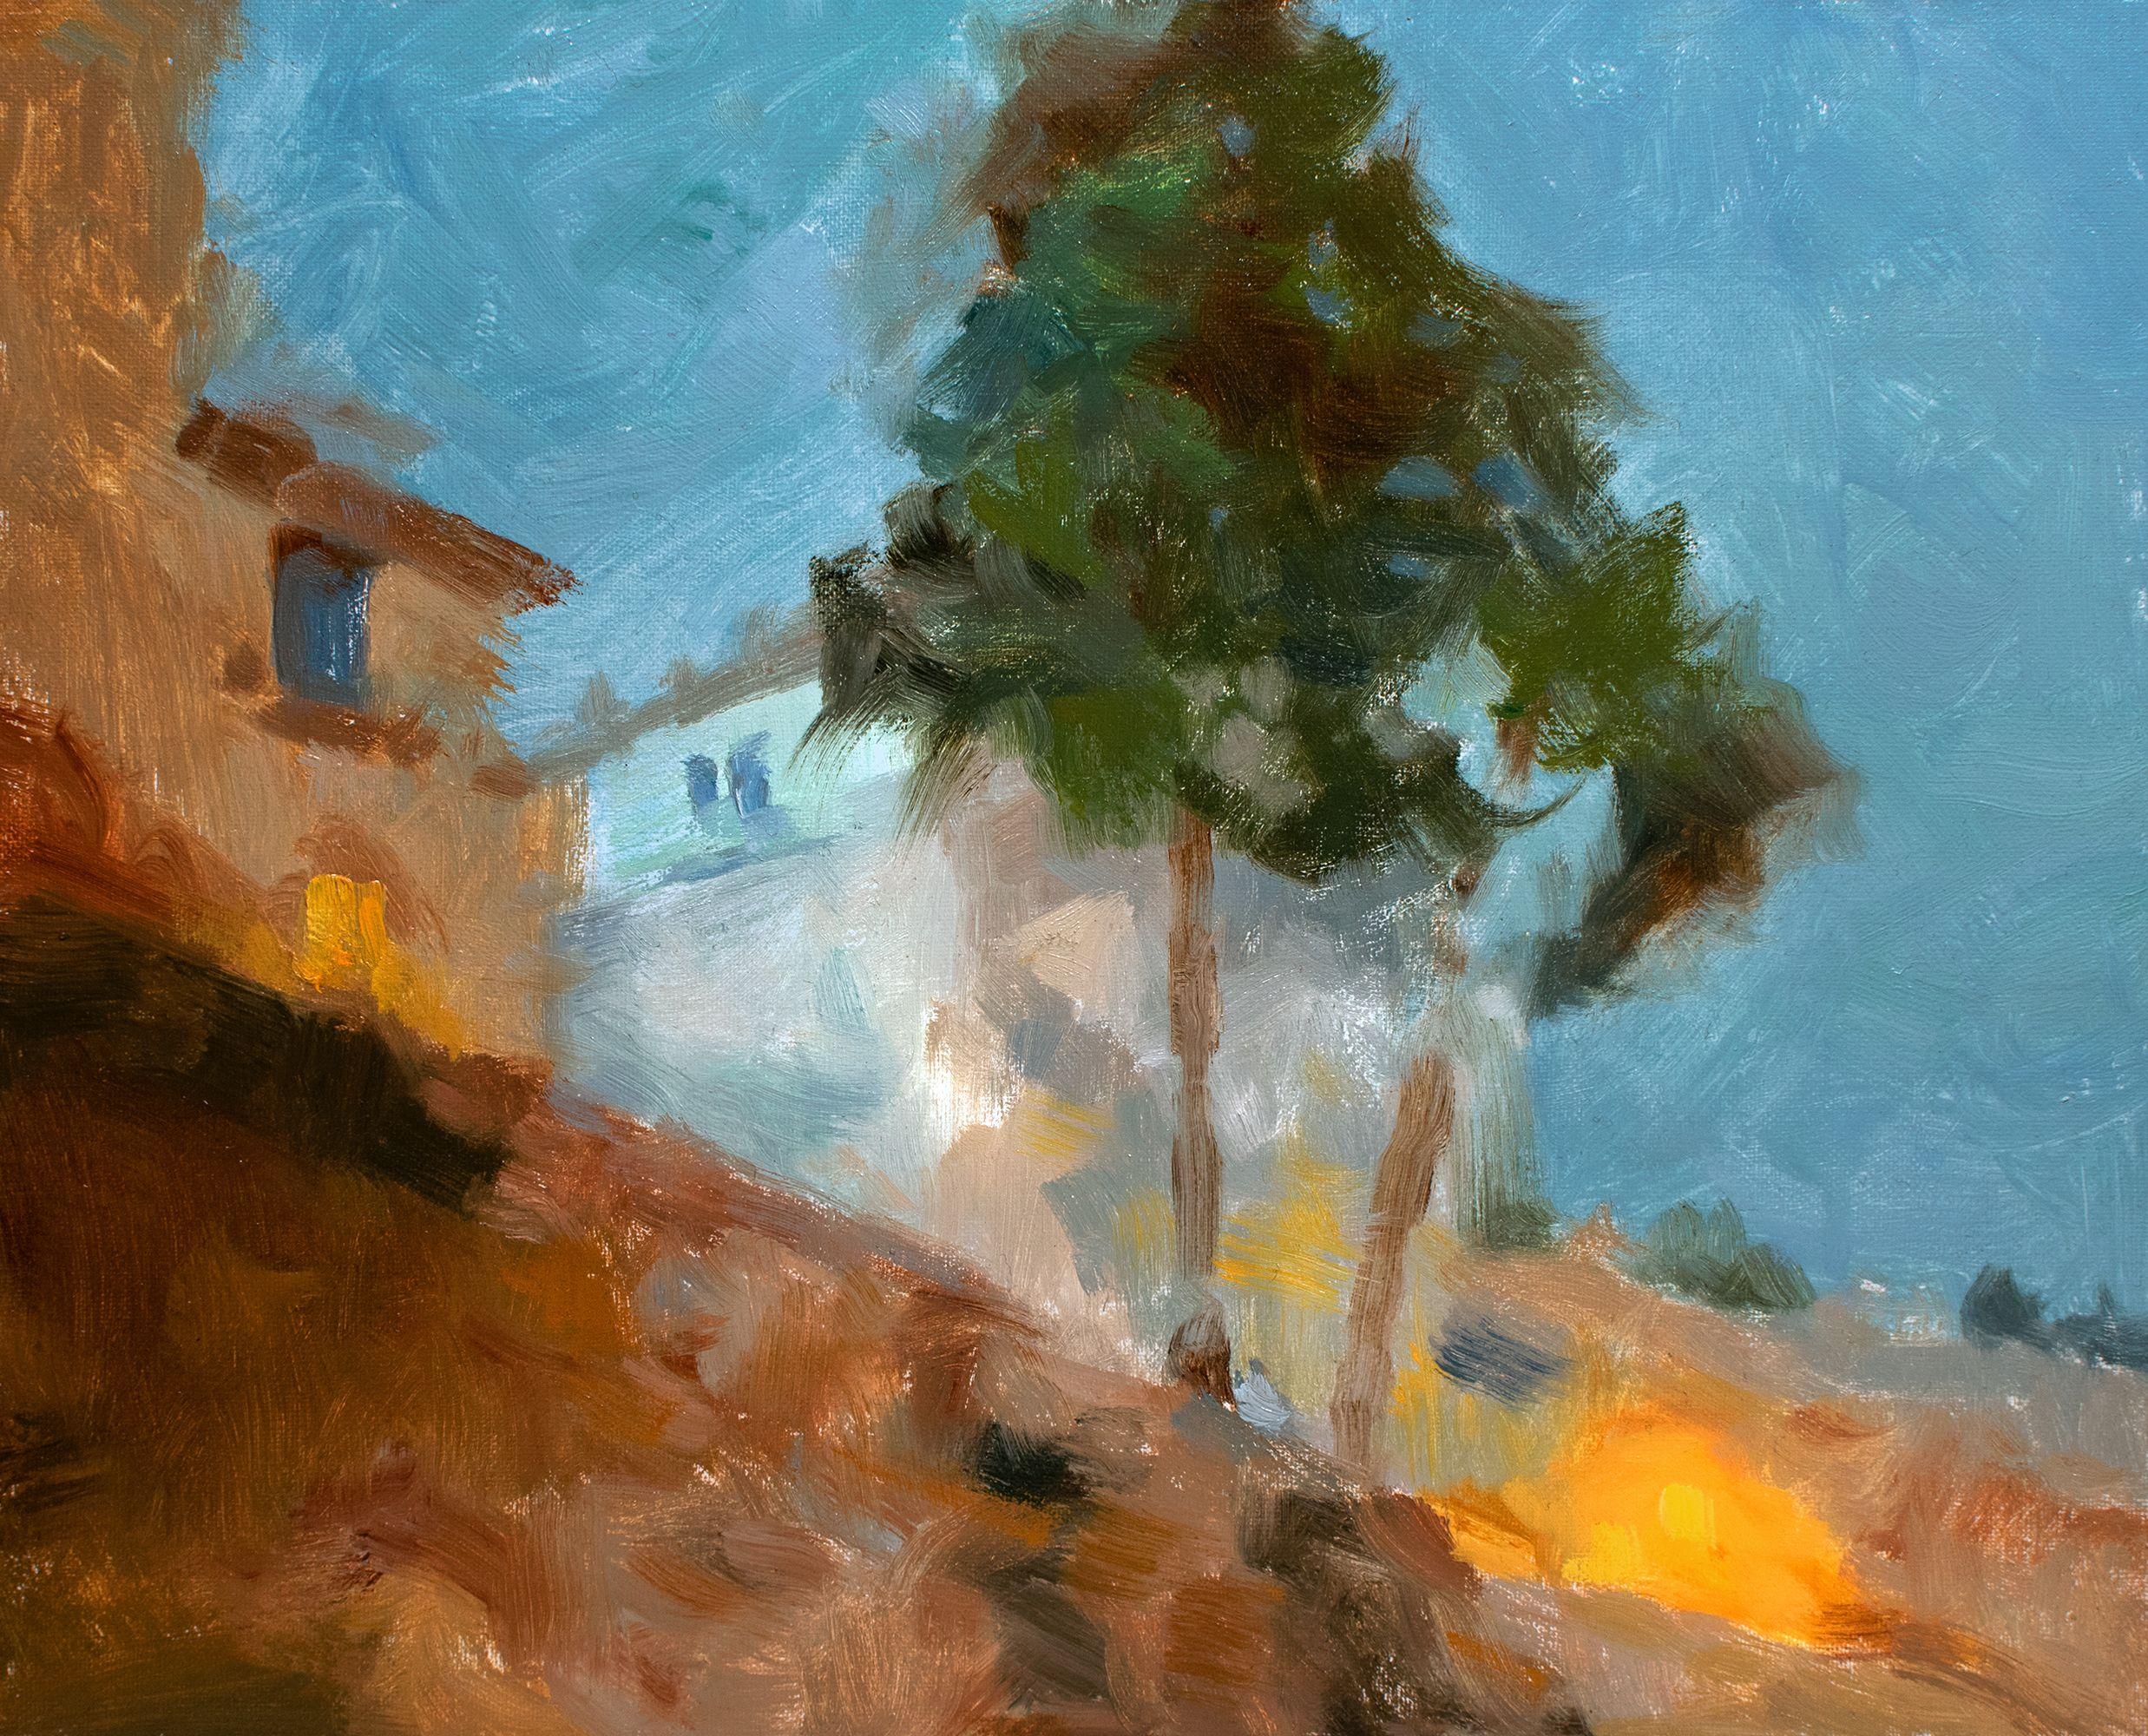 From within the city of Rome as dusk settled into night. This is a loosely painted impressionist oil painting on Italian manufacture canvas attached to a wooden board. It is sized 24x30cm (9.4in x 11.8in). :: Painting :: Impressionist :: This piece